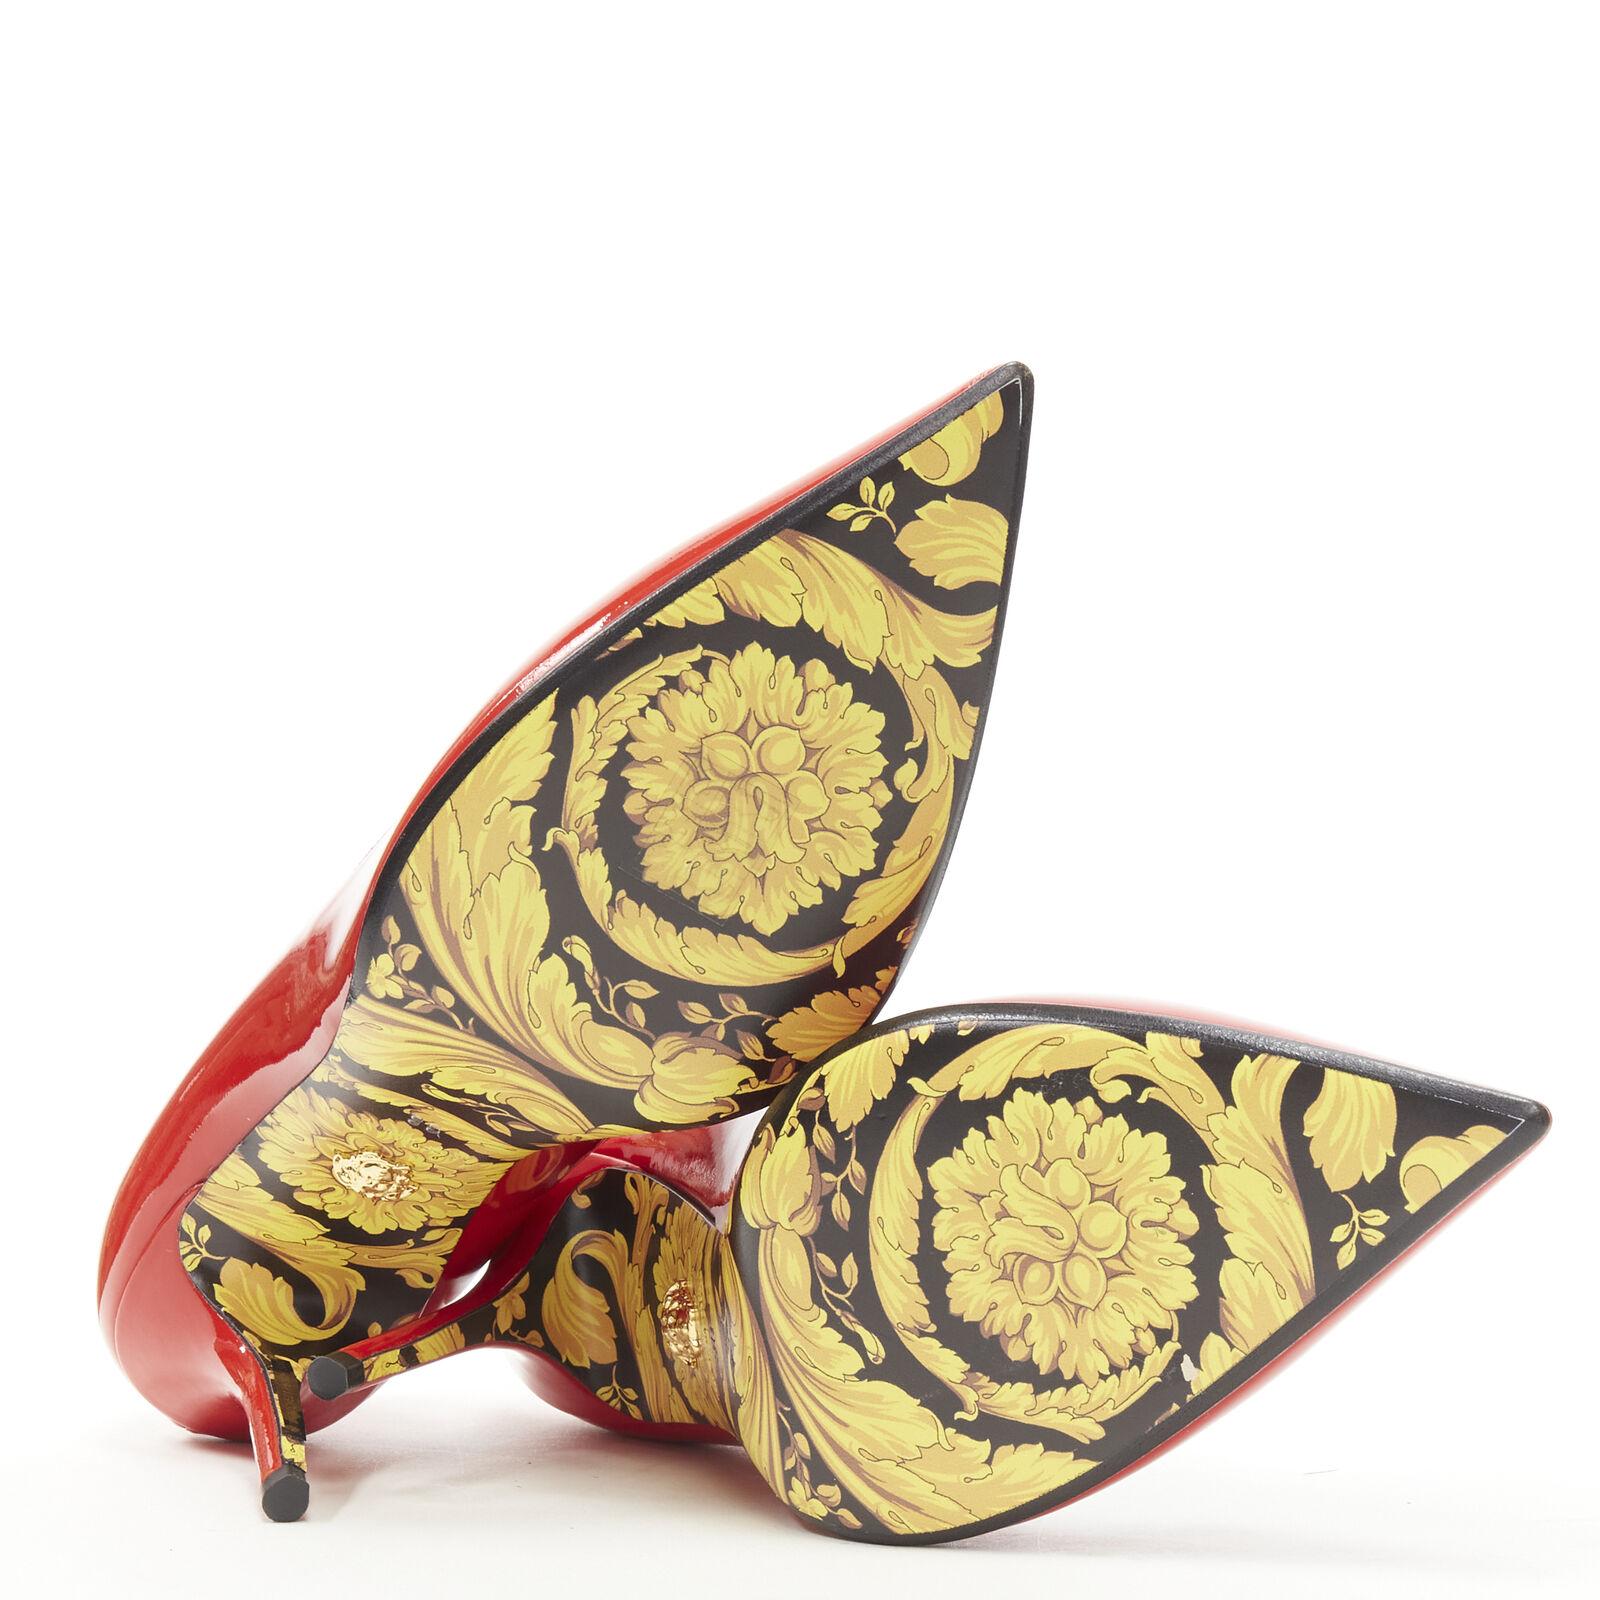 new VERSACE Hibiscus Barocco Eros red patent floral sole Medusa pump US7 EU37
Reference: TGAS/C01200
Brand: Versace
Designer: Donatella Versace
Model: DST037M DVE21 K5NOH
Collection: Hibiscus Barocco
Material: Patent Leather
Color: Red,